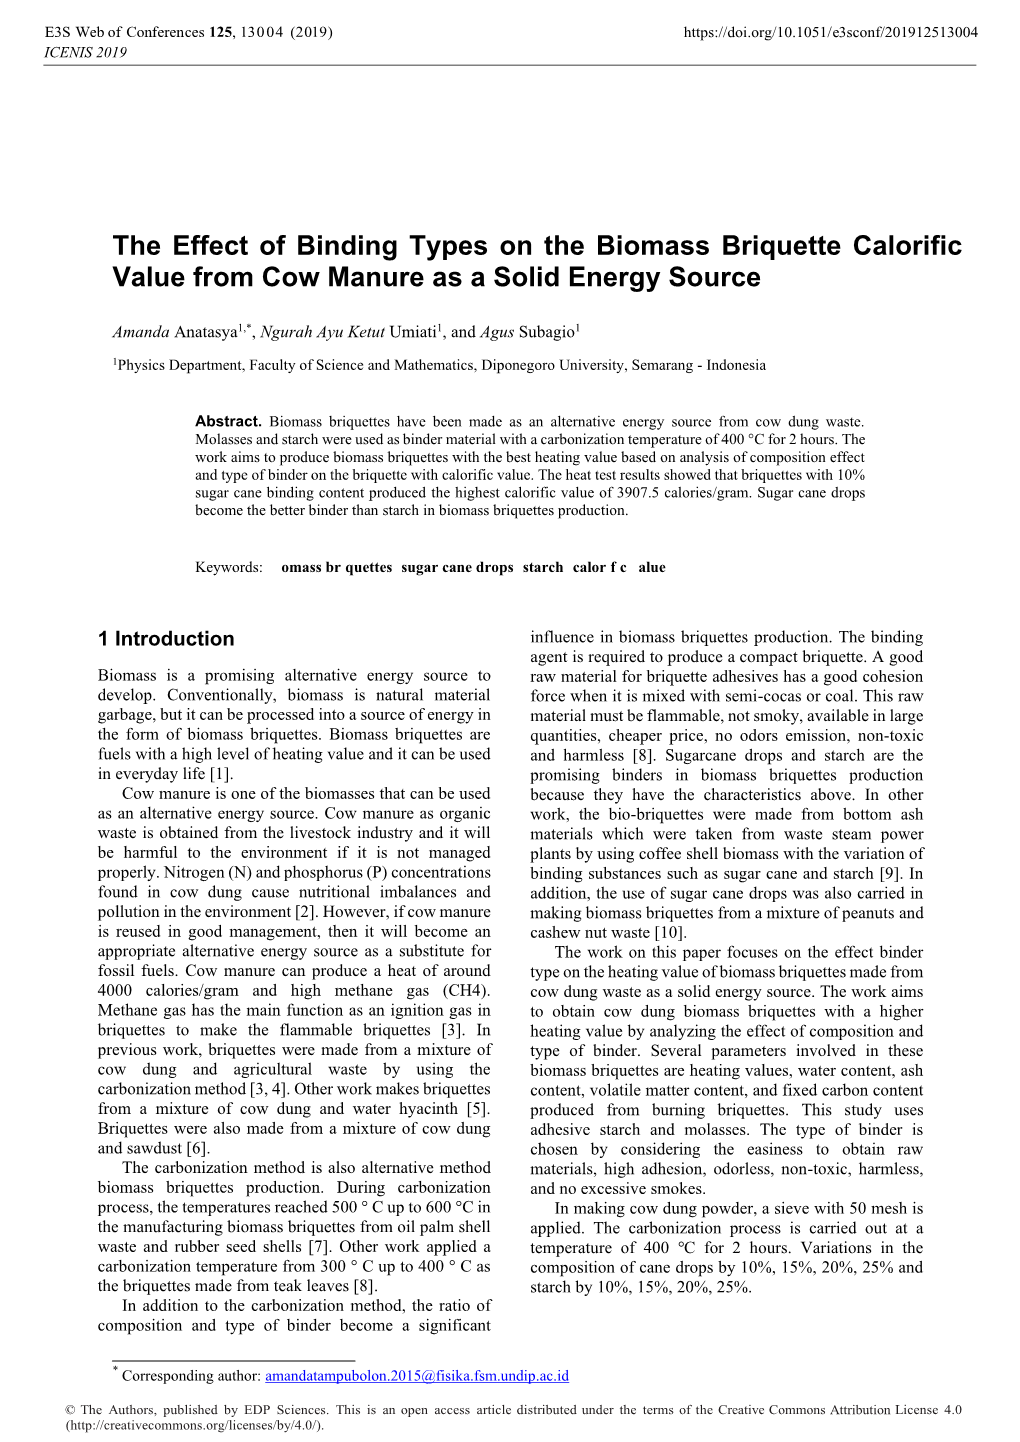 The Effect of Binding Types on the Biomass Briquette Calorific Value from Cow Manure As a Solid Energy Source